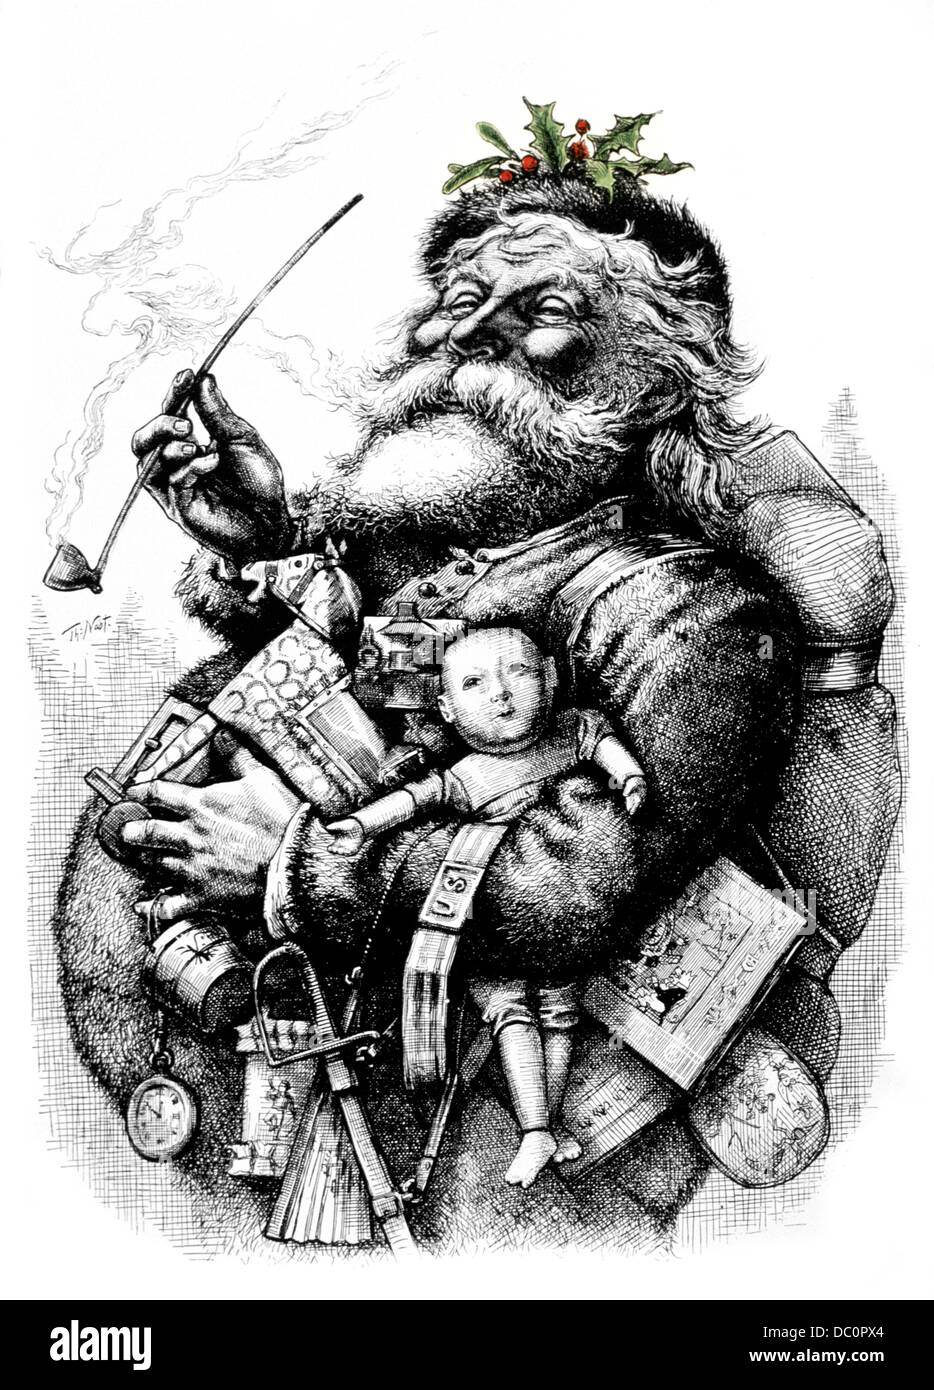 SANTA HOLDING TOYS PIPE WITH GREEN HOLLY IN HIS CAP 1800s 1881 THOMAS NAST DRAWING OF MERRY OLD SANTA Stock Photo